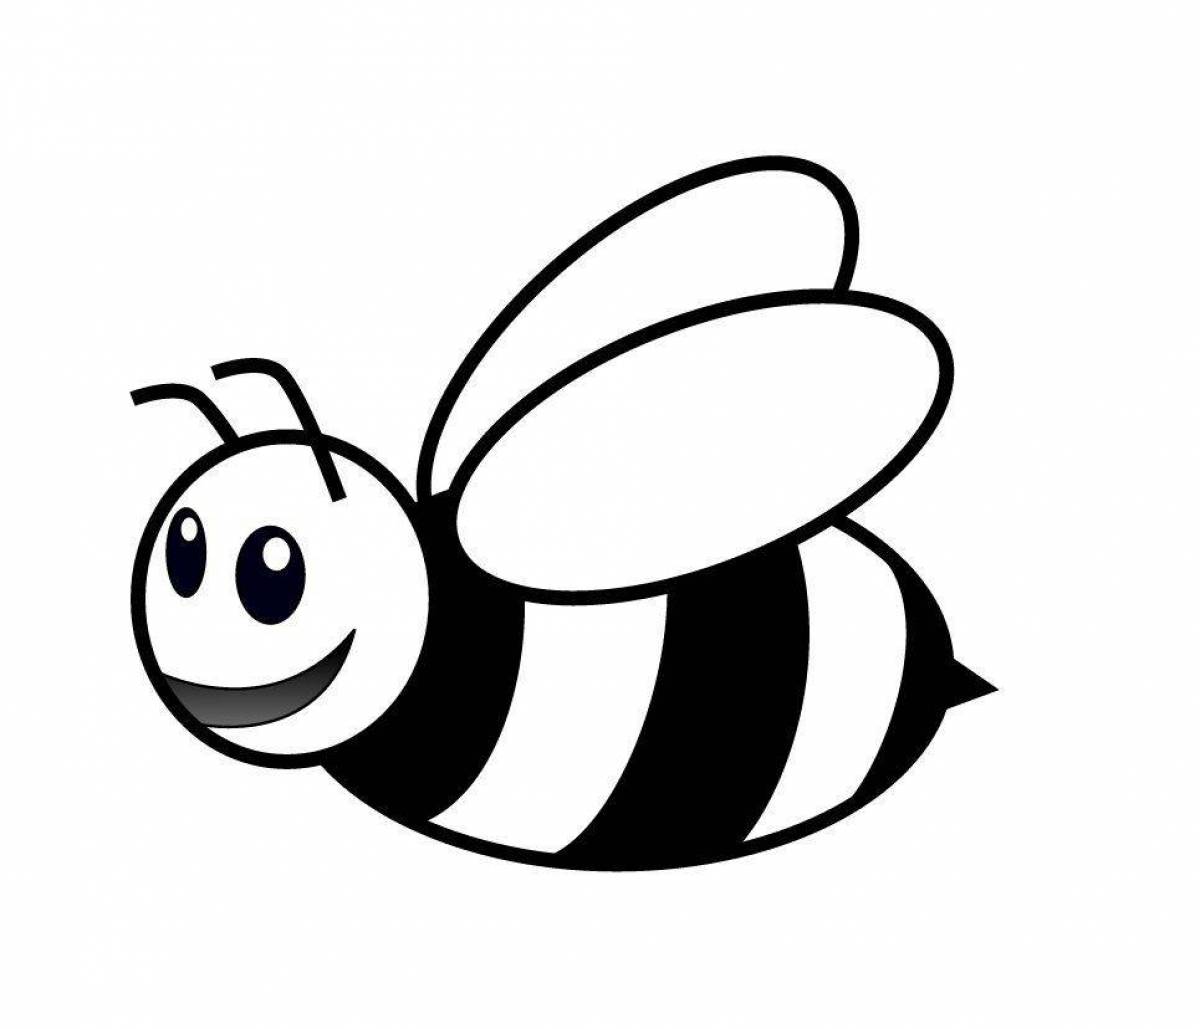 Coloring book bright bee